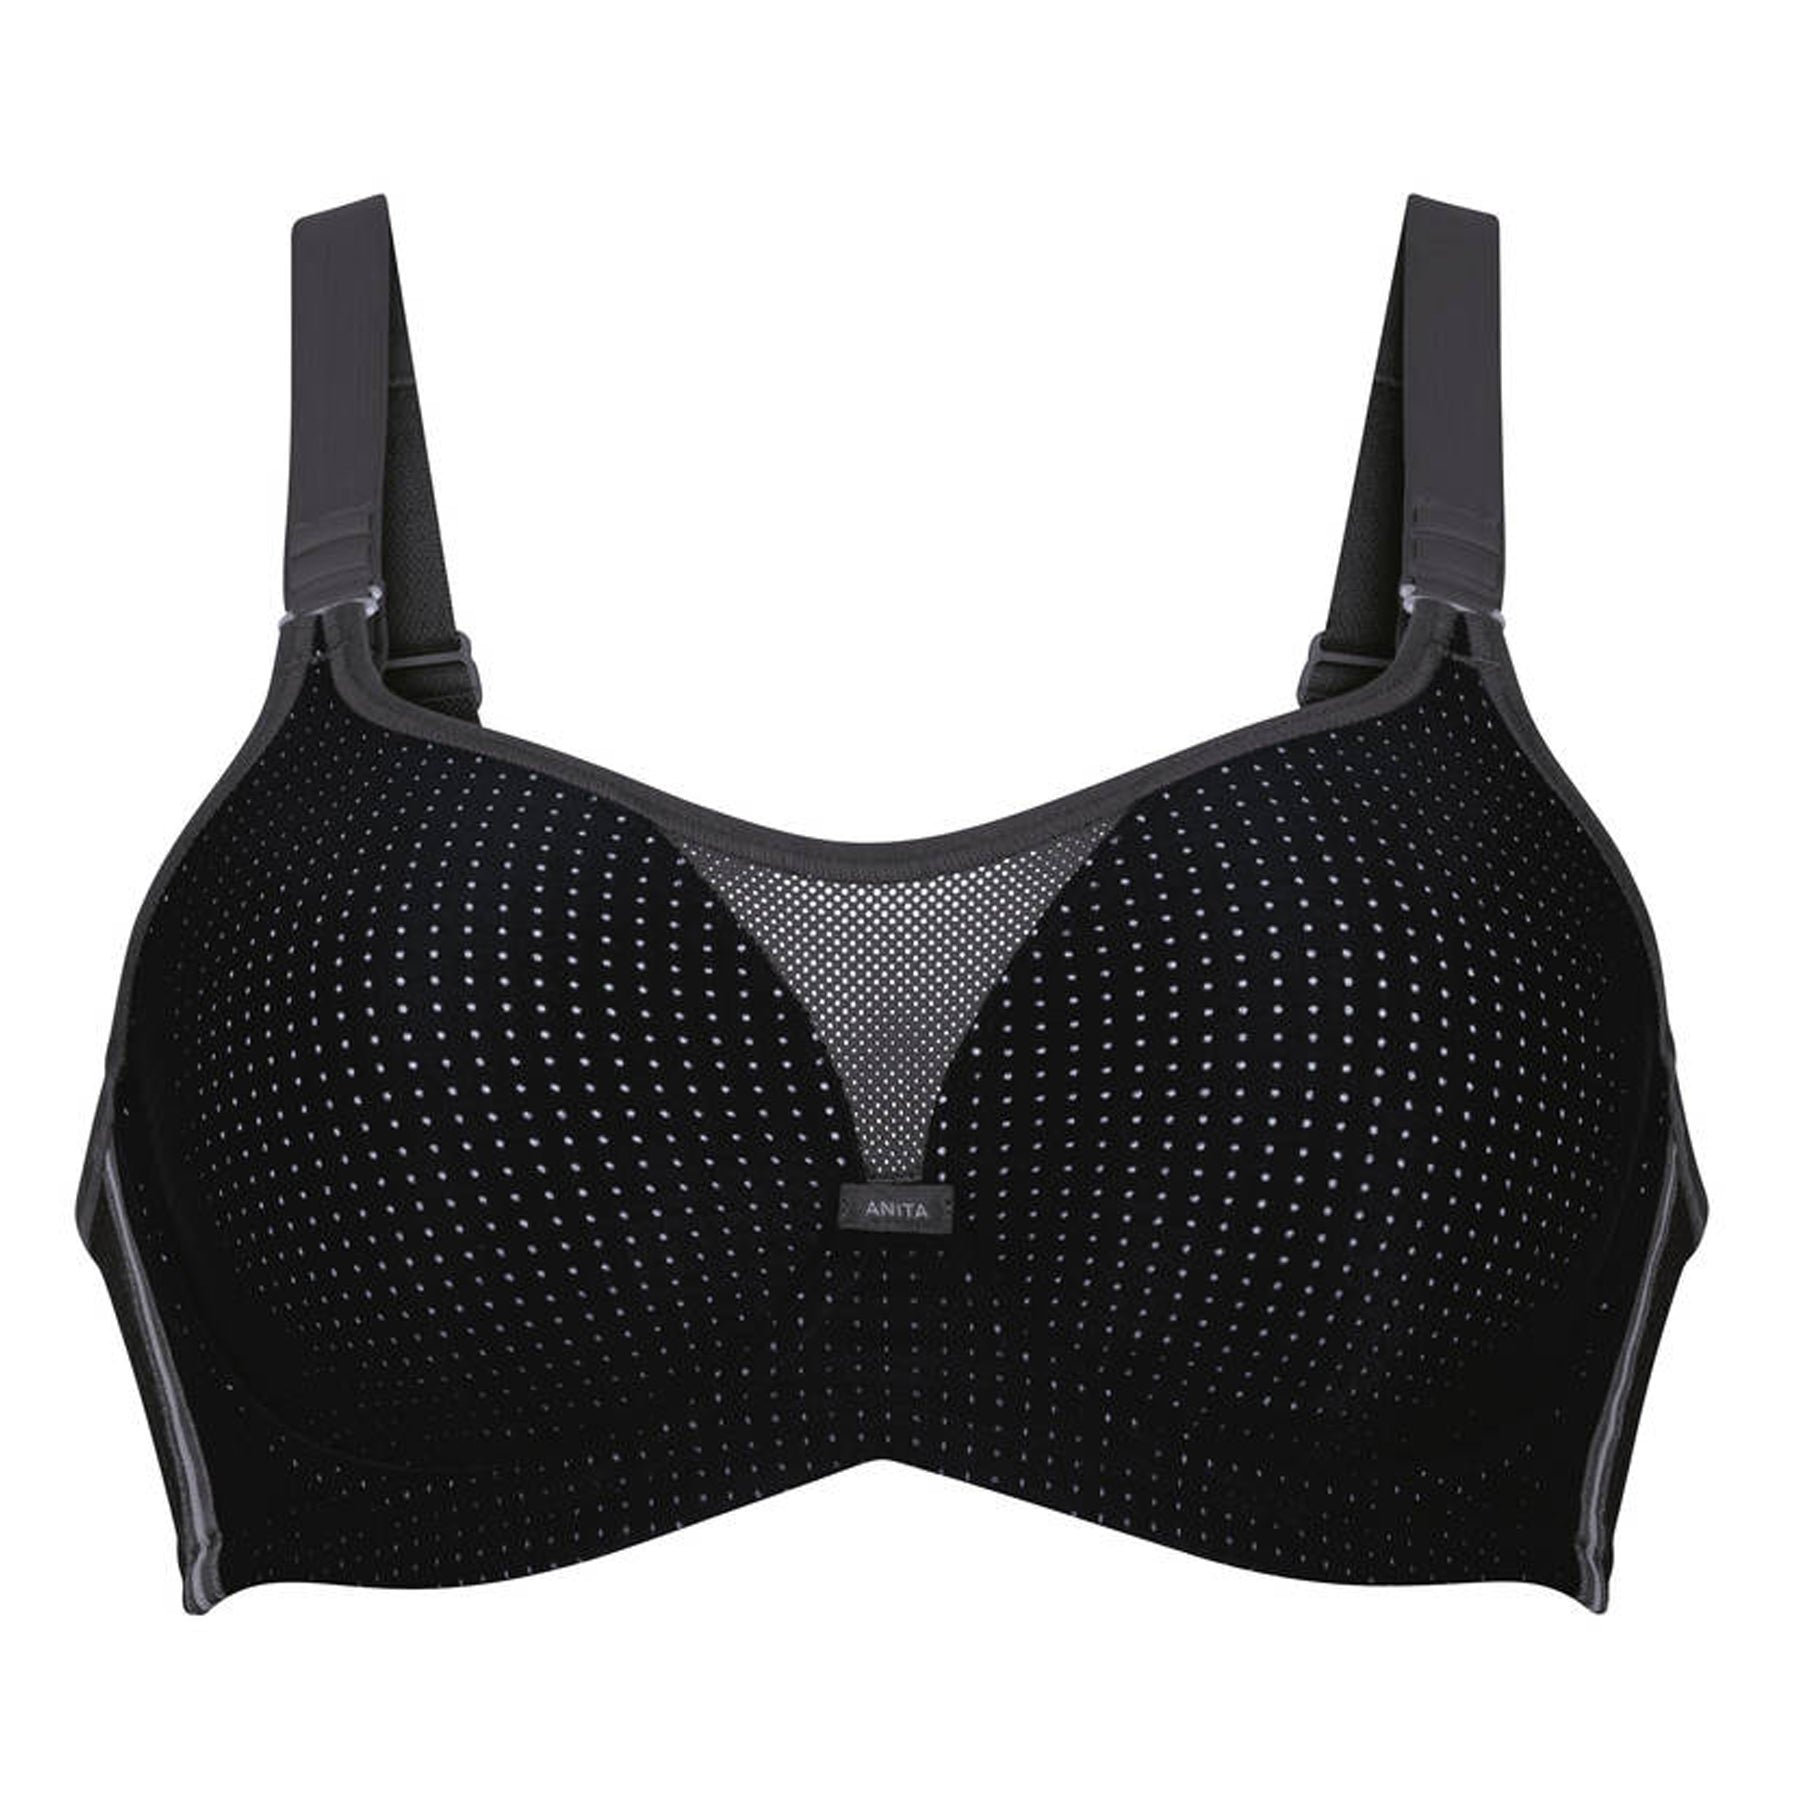  Anita Havanna 5813-463 Women's Shadow Blue Non-Wired Full Cup  Bra 50F : Anita: Clothing, Shoes & Jewelry